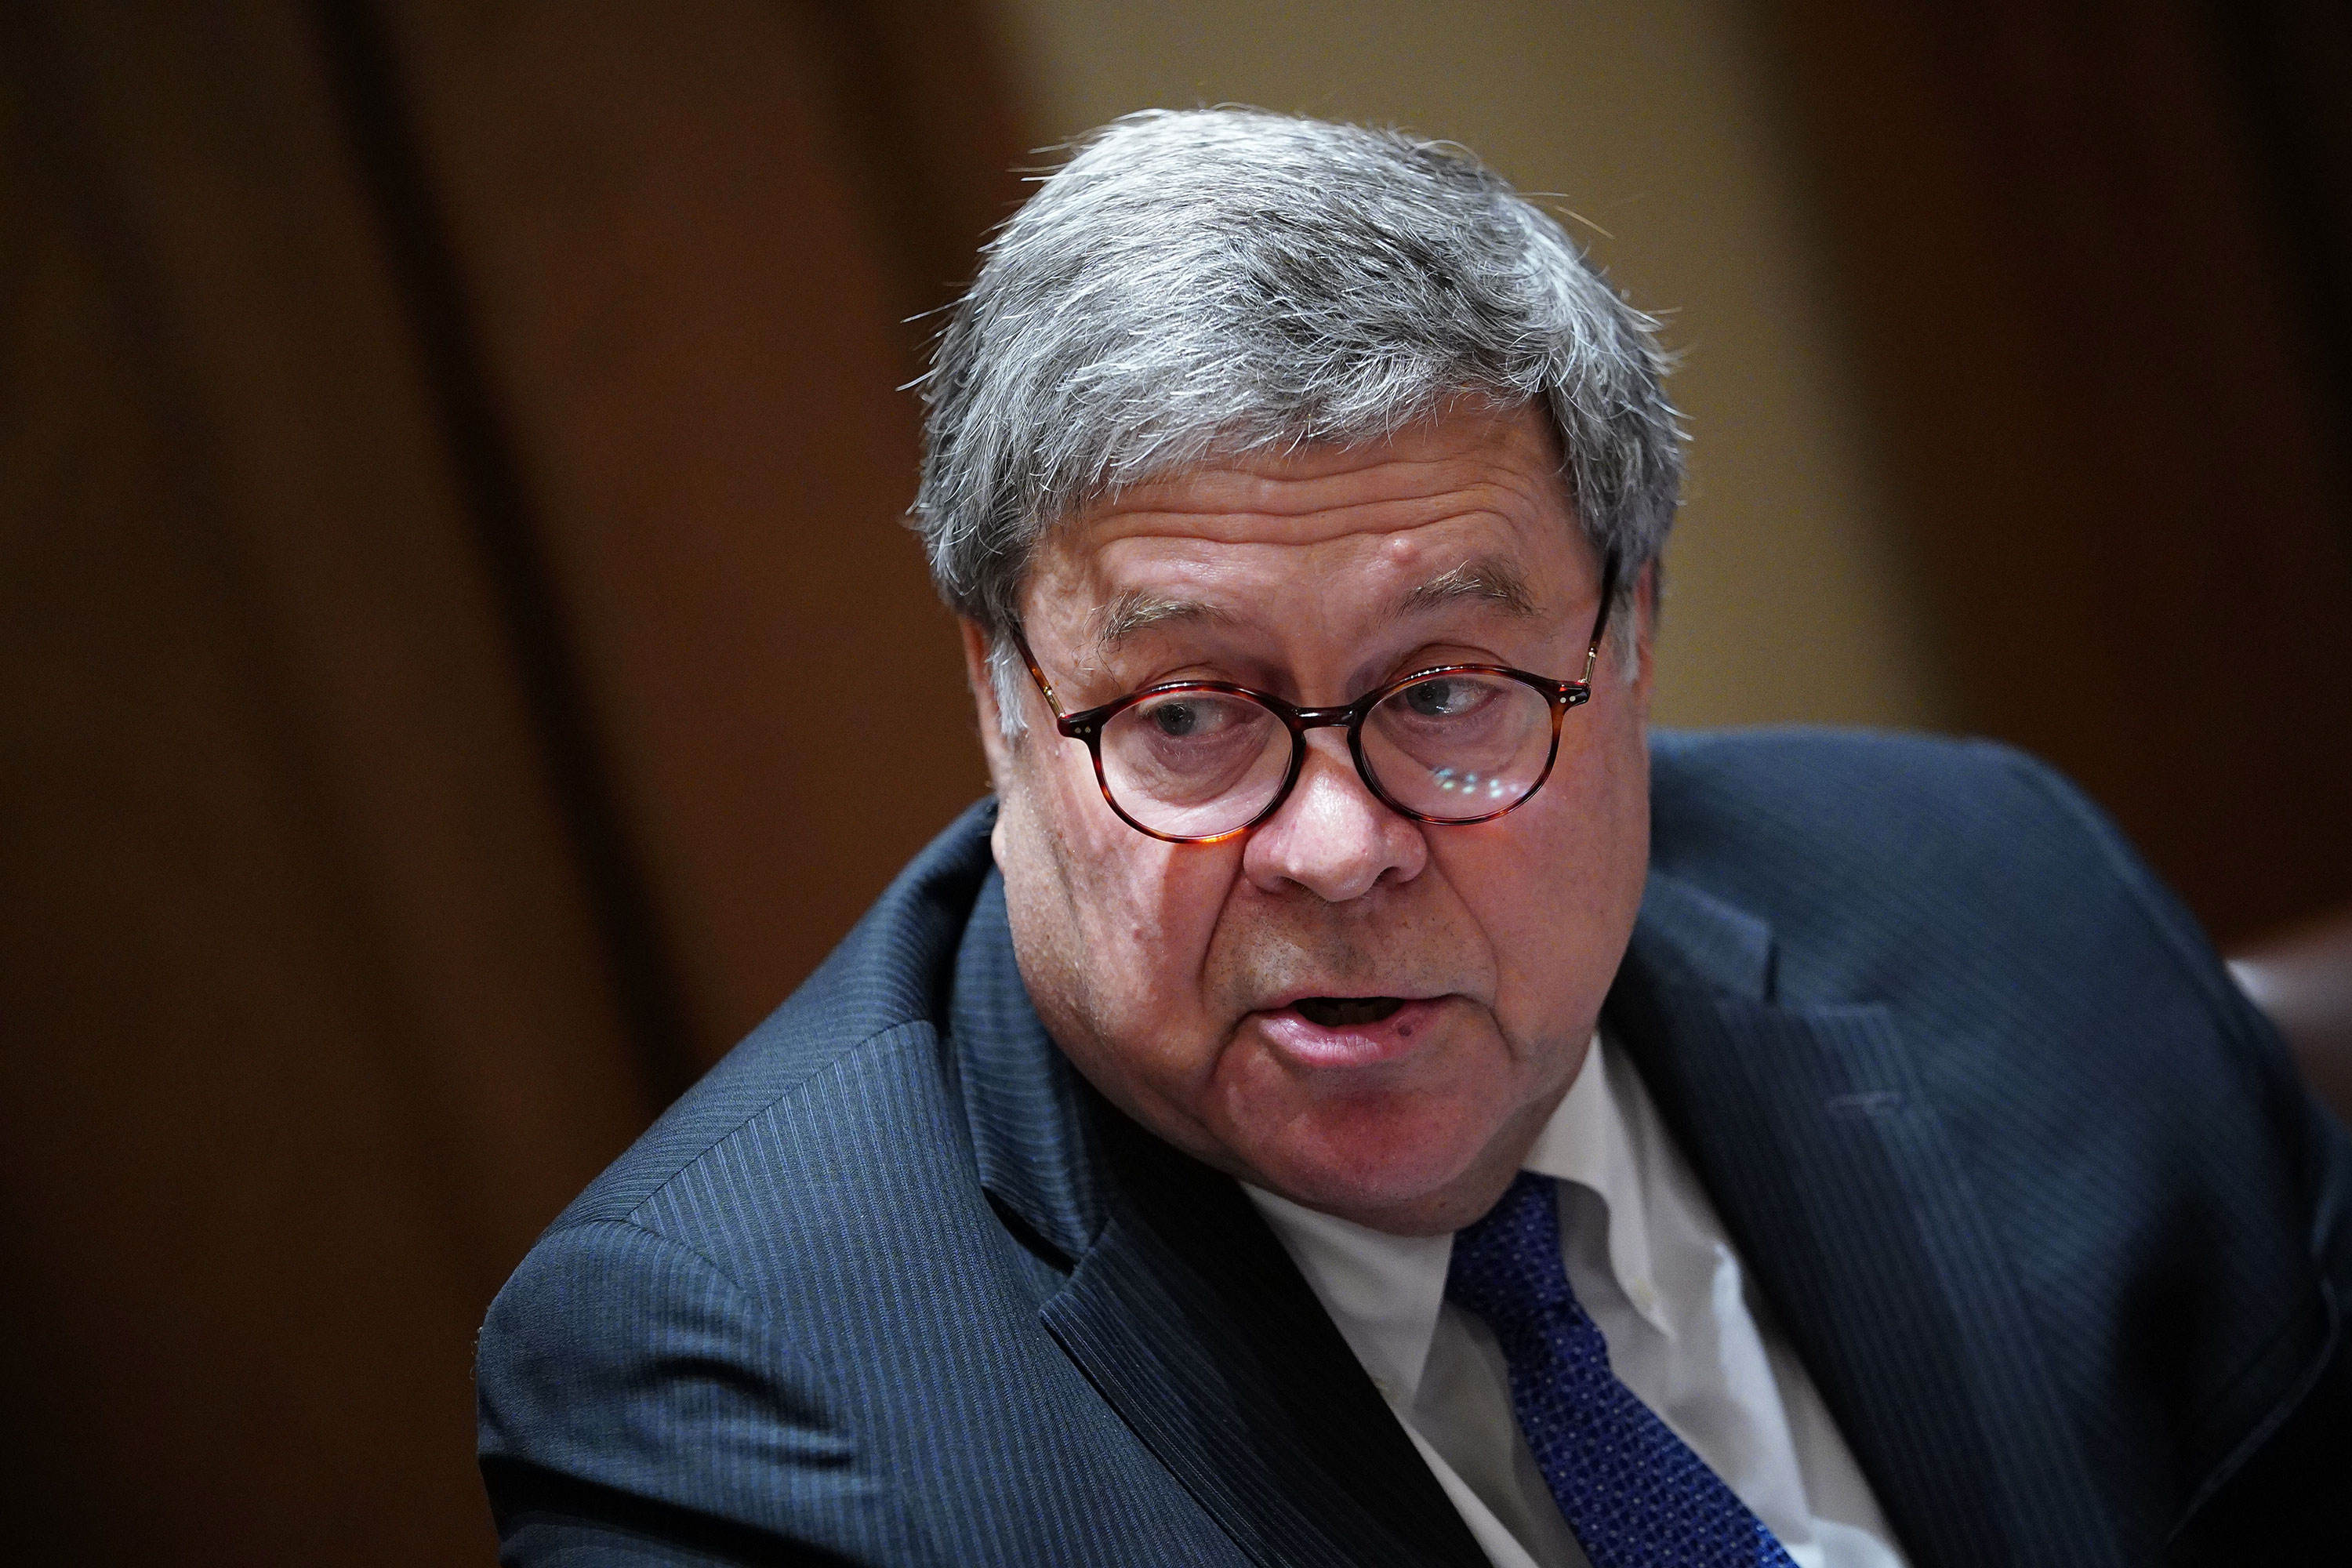 Attorney General William Barr attends a meeting at the White House on September 23 in Washington DC.